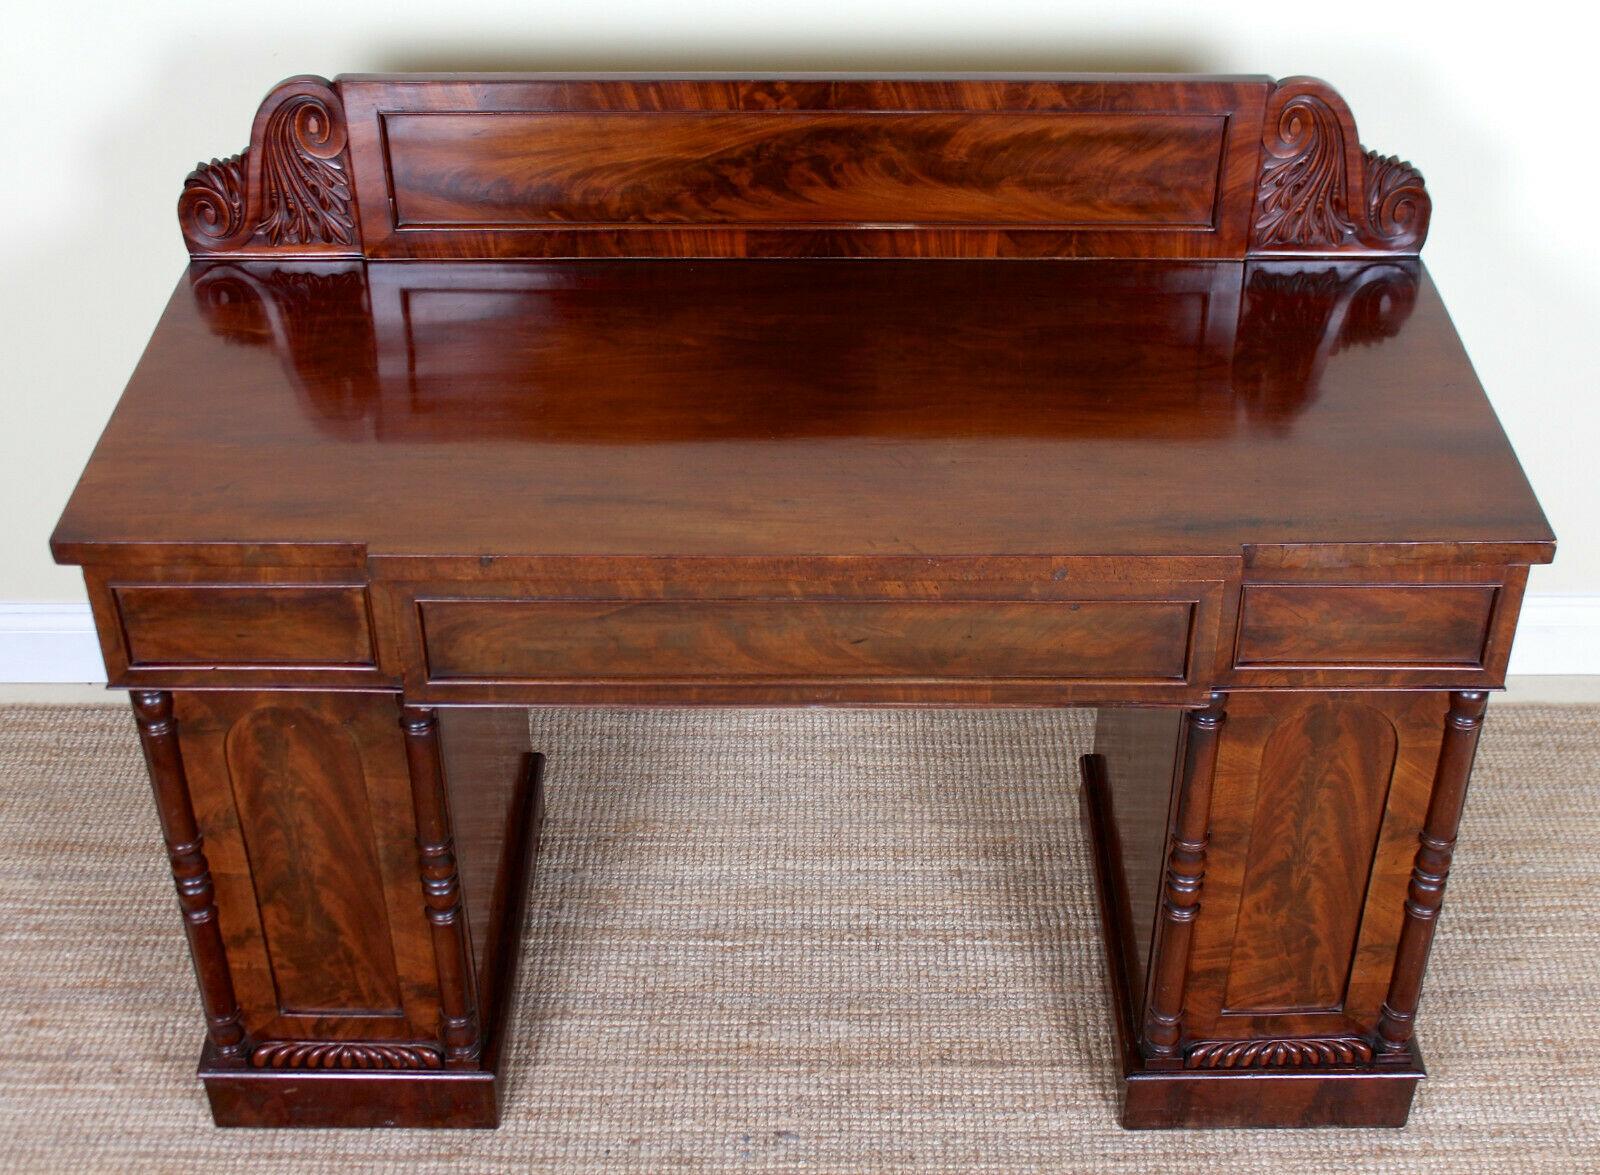 English Regency Mahogany Sideboard Early 19th Century Twin Pedestal Credenza For Sale 2